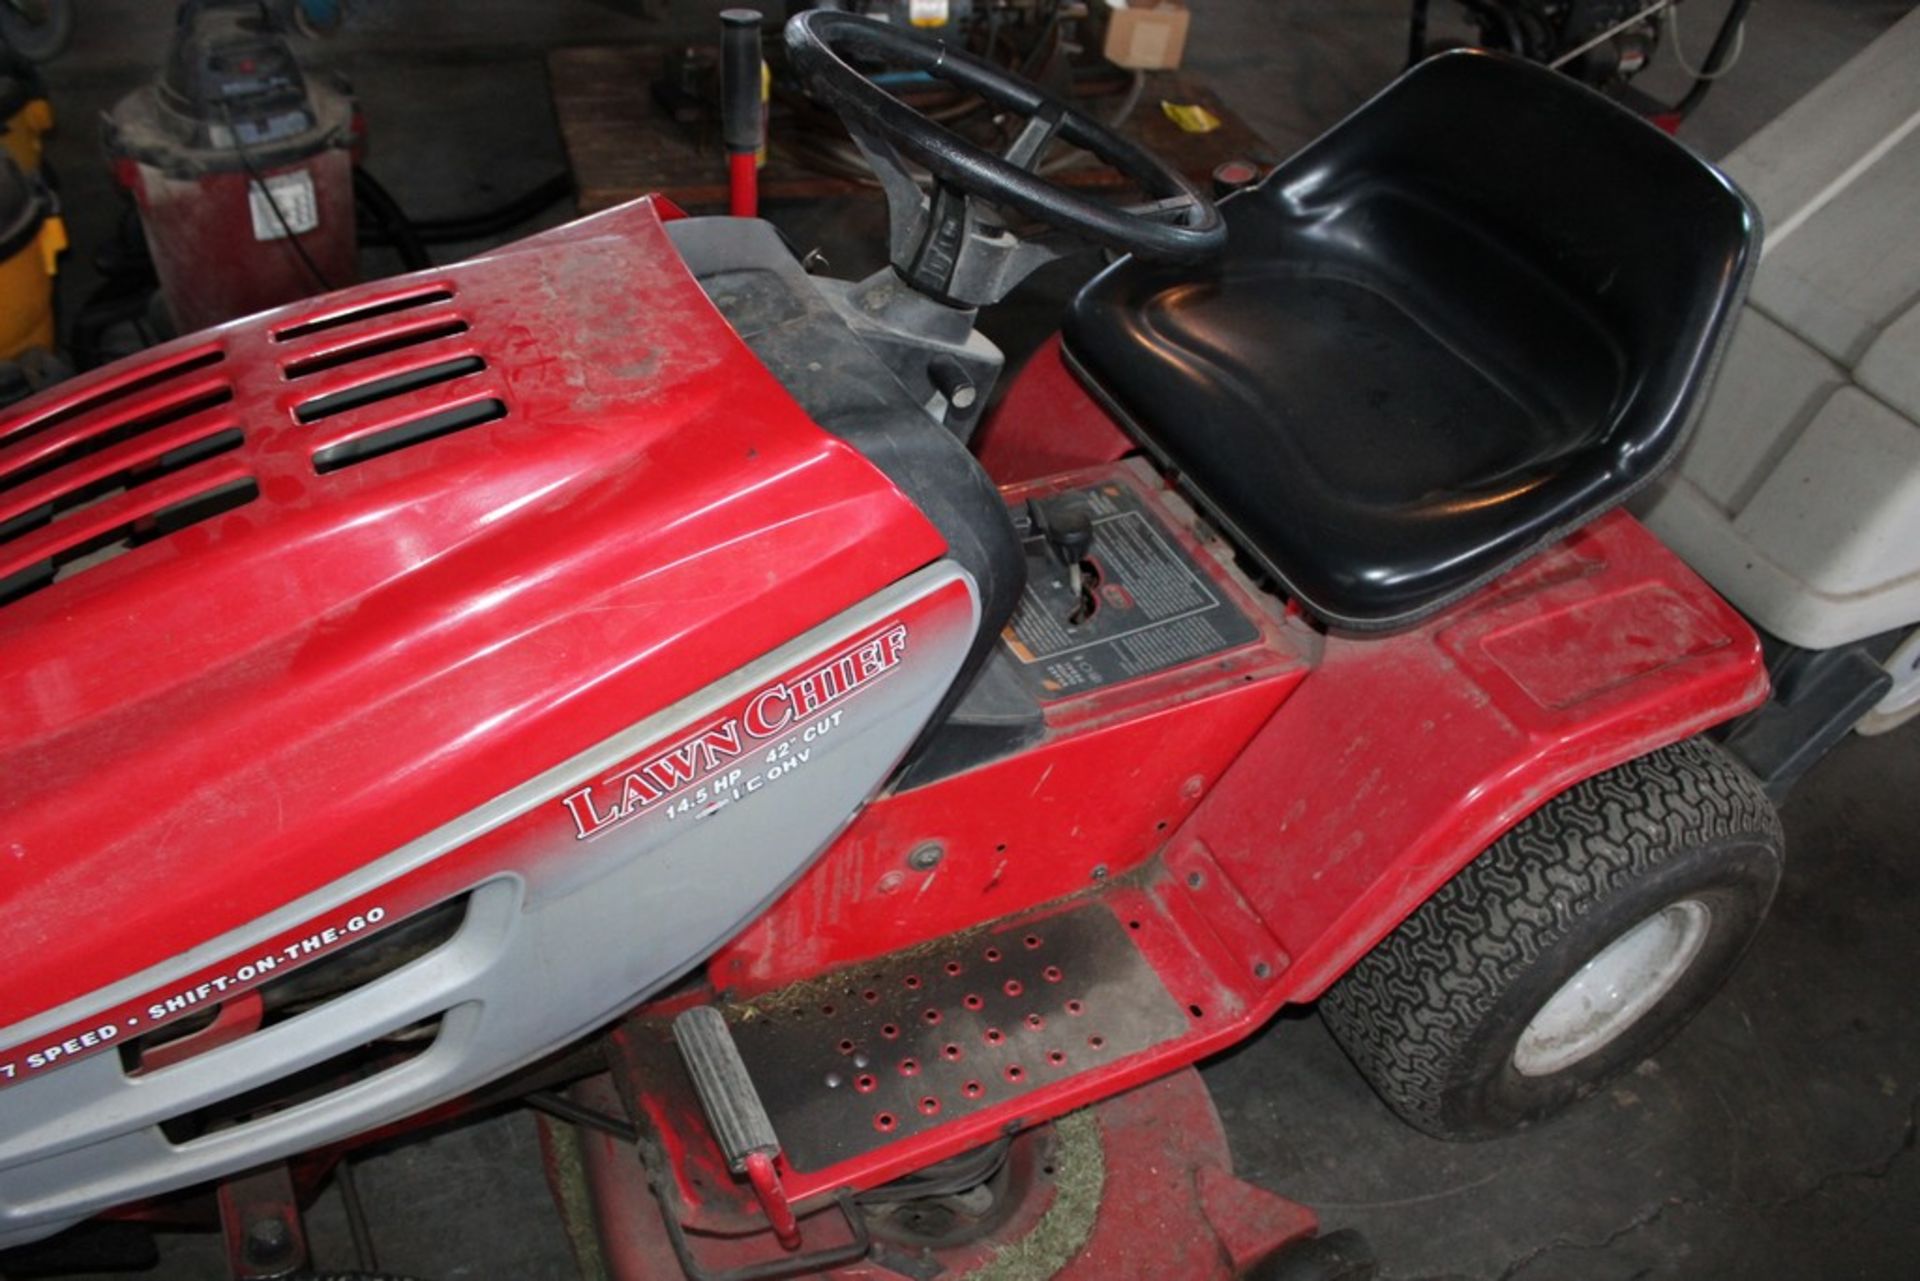 LAWN CHIEF 42" RIDING LAWN MOWER WITH BRIGGS & STRATTON 14.5 HP GAS ENGINE, 7 SPEED, SHIFT ON THE GO - Image 6 of 6